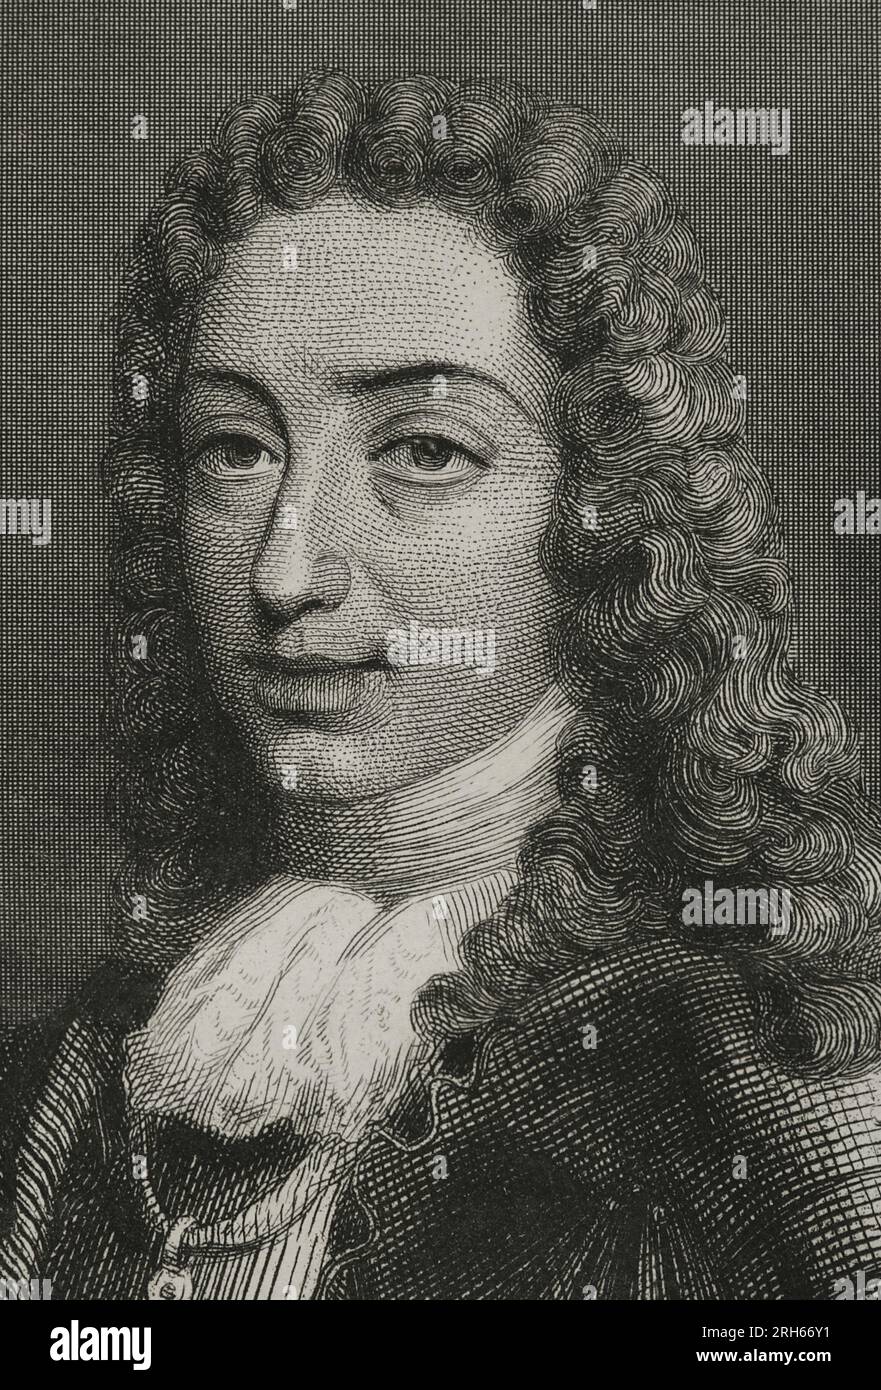 Charles VI (1685-1740). Holy Roman Emperor (1711-1740). Portrait. Pretender to the throne of Spain as Charles III. Engraving by Geoffroy. 'Historia Universal', by Cesar Cantu. Volume VI. 1857. Stock Photo